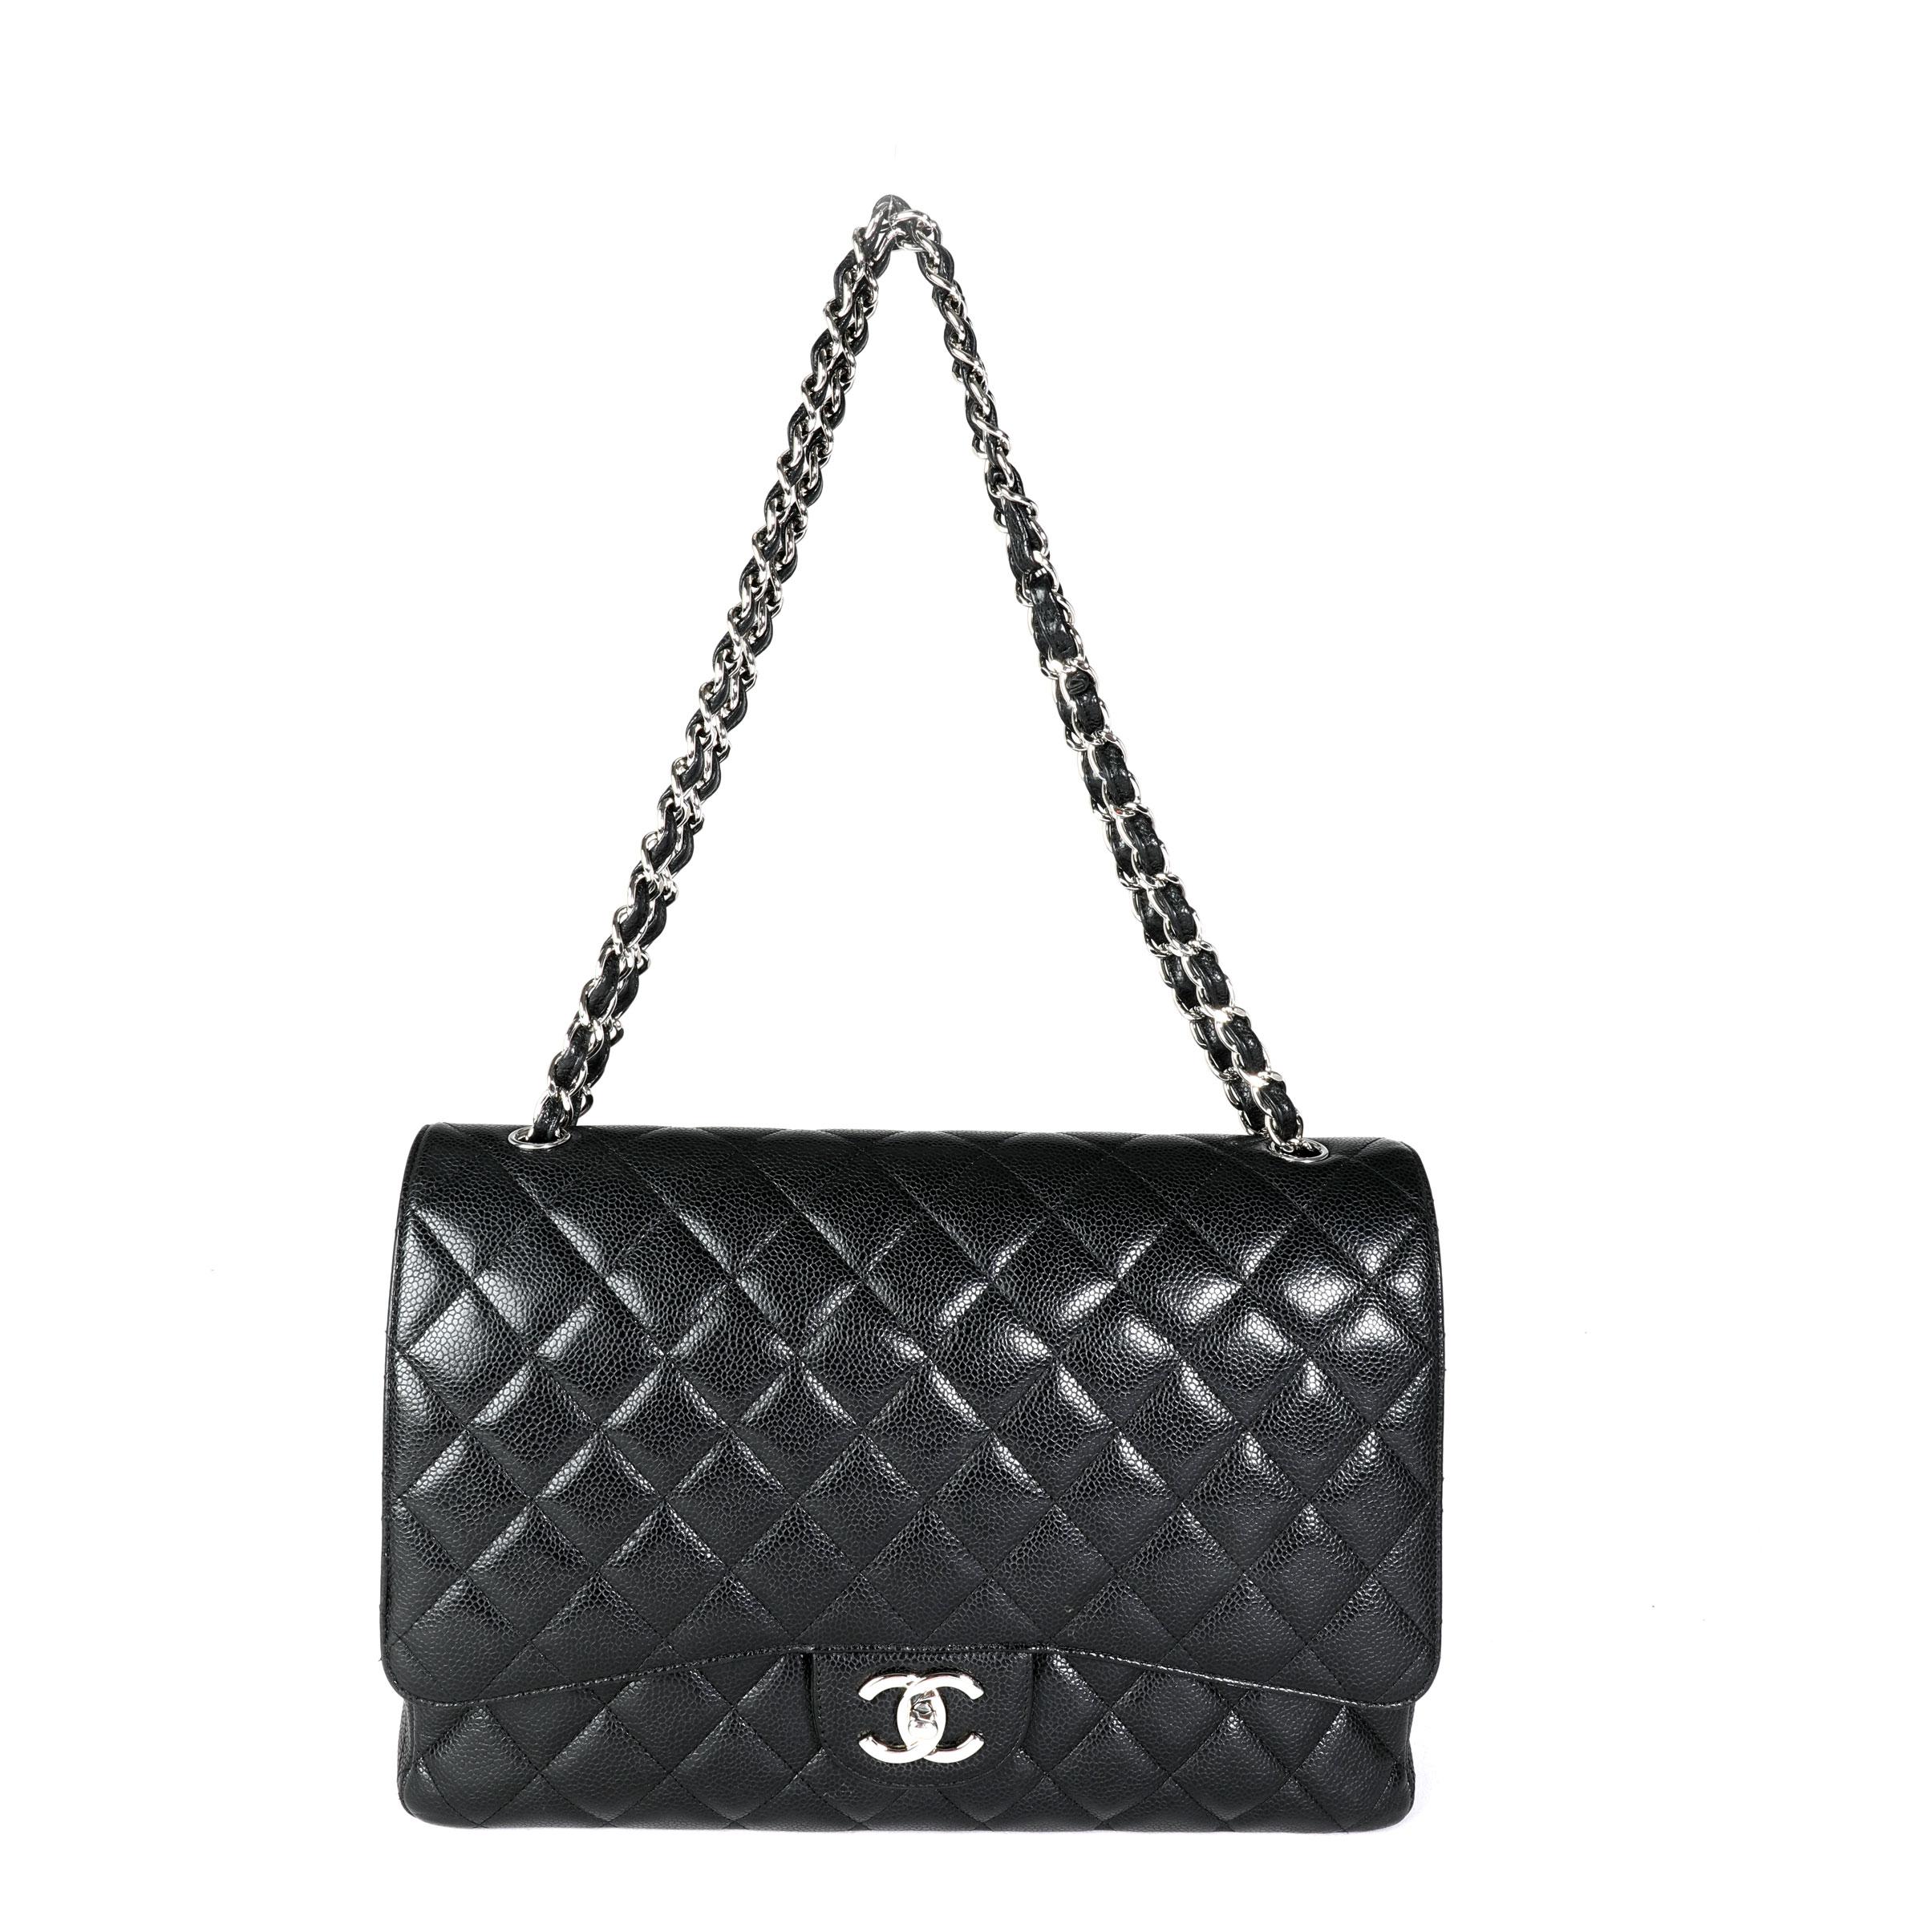 Listing Title: Chanel Black Quilted Caviar Maxi Classic Double Flap Bag
SKU: 116398
MSRP: 10000.00

Handbag Condition: Very Good
Condition Comments: Very Good Condition. Scuffing to corners. Marks to exterior. Scratching and tarnishing to hardware.